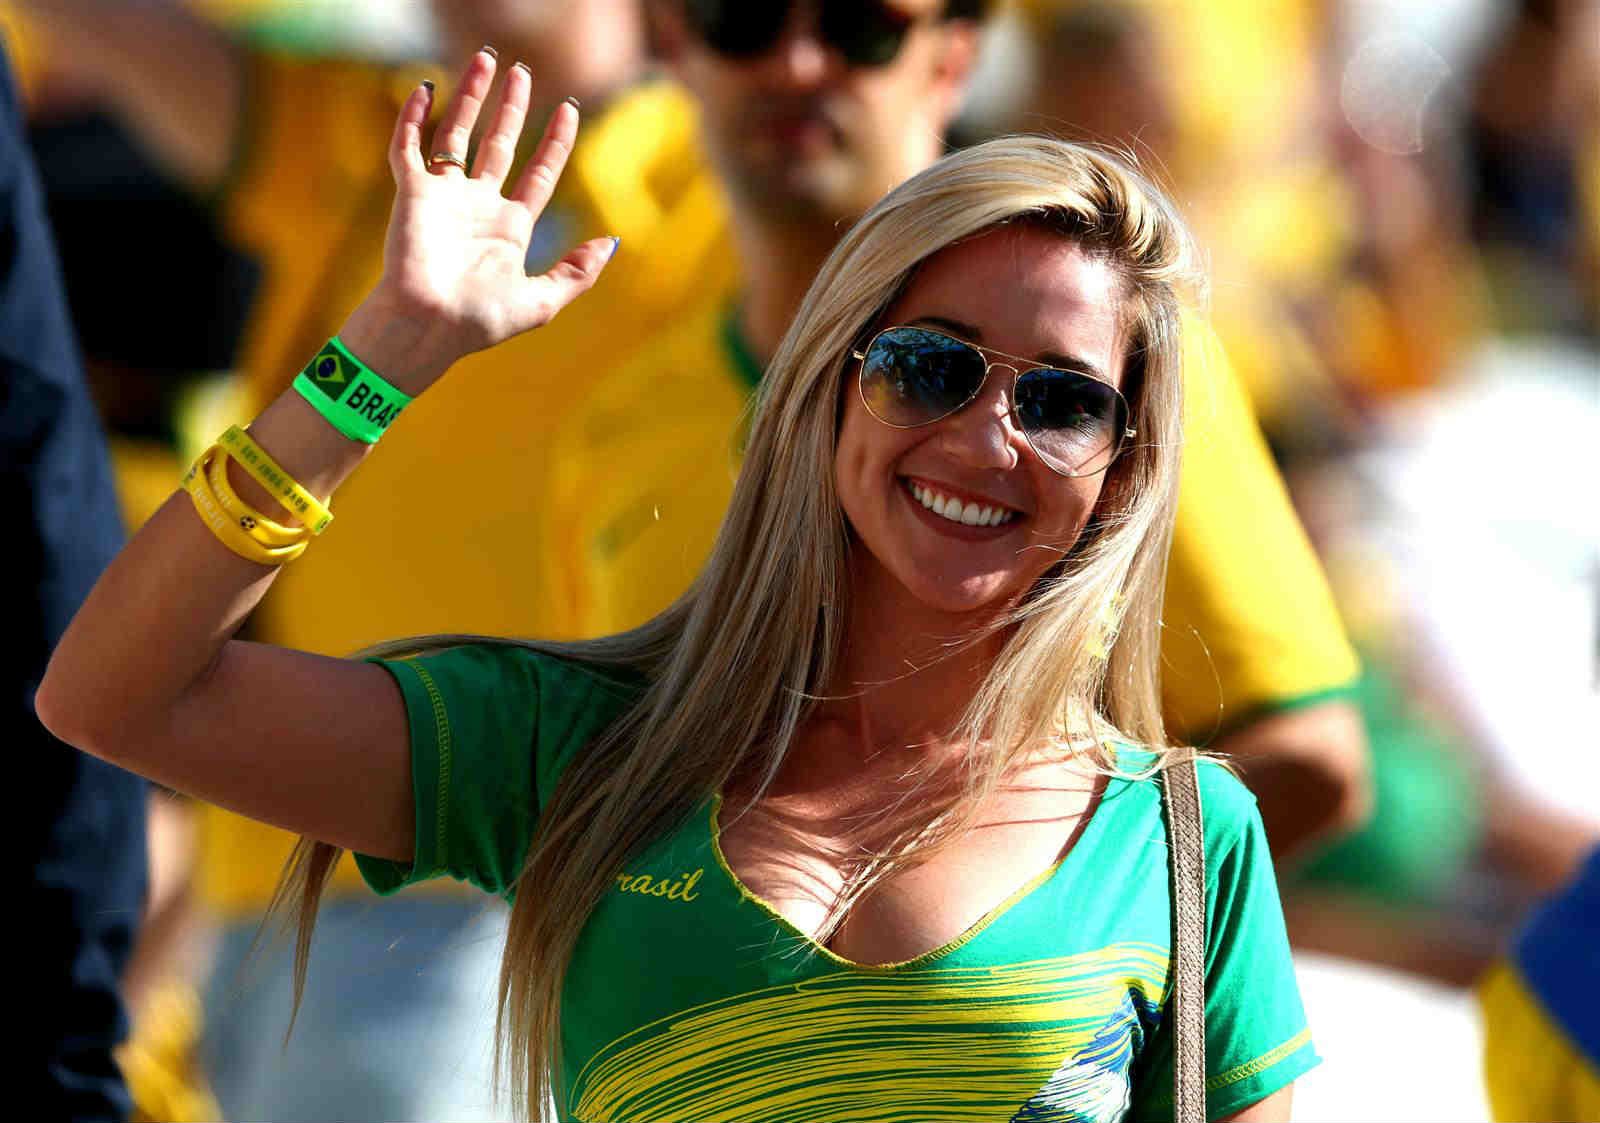 Brazil have some of the sexiest female football fans in the world